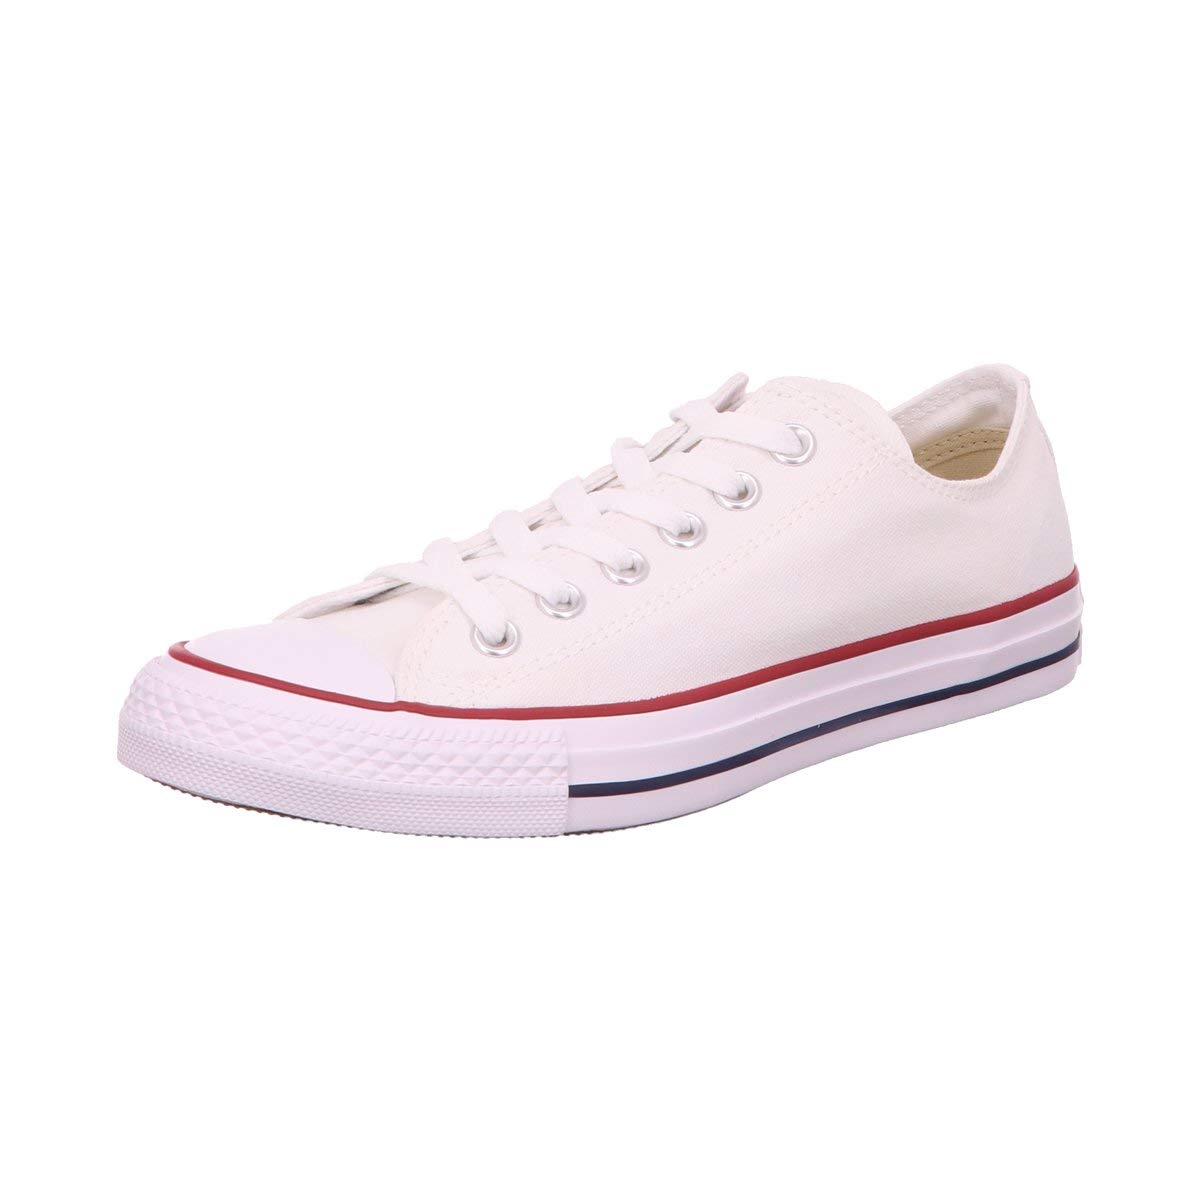 Converse Women's Chuck Taylor All Star Low Top Sneakers